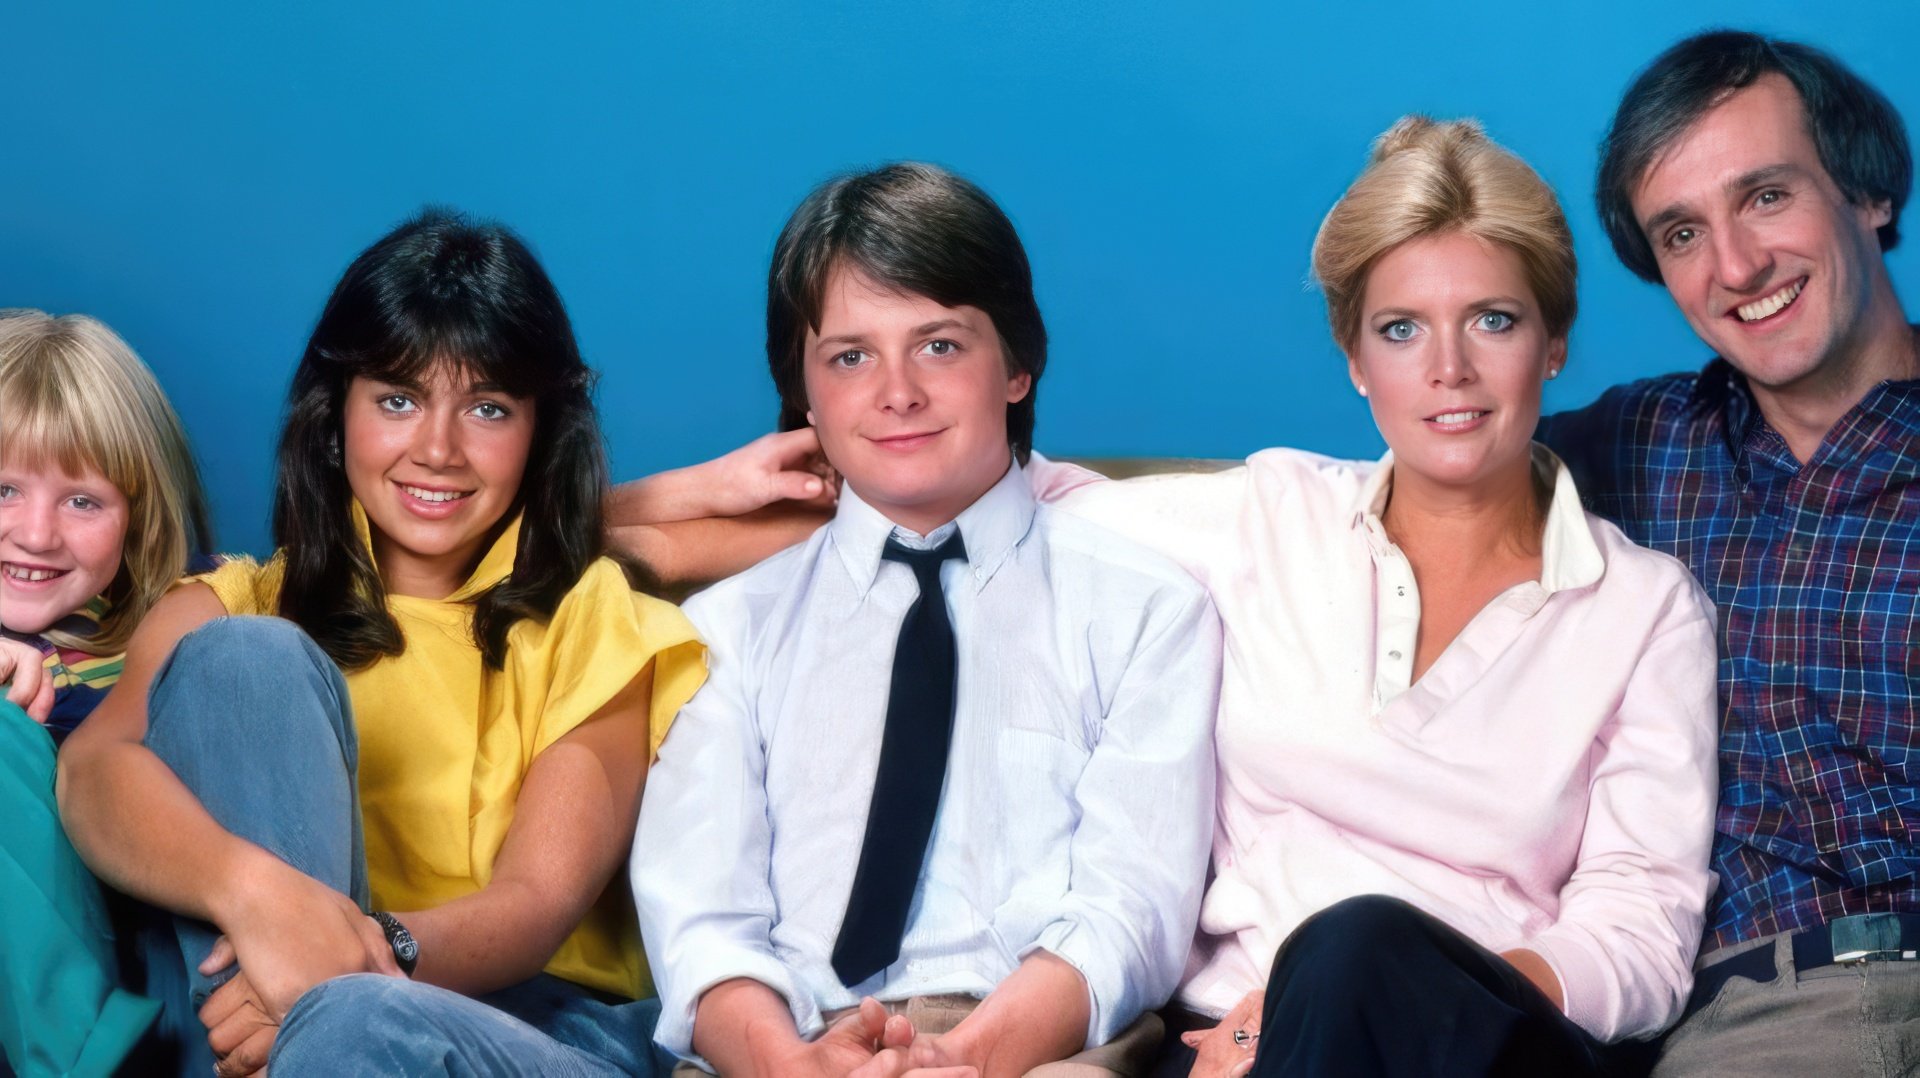 Michael J. Fox (in the middle) in Family Ties